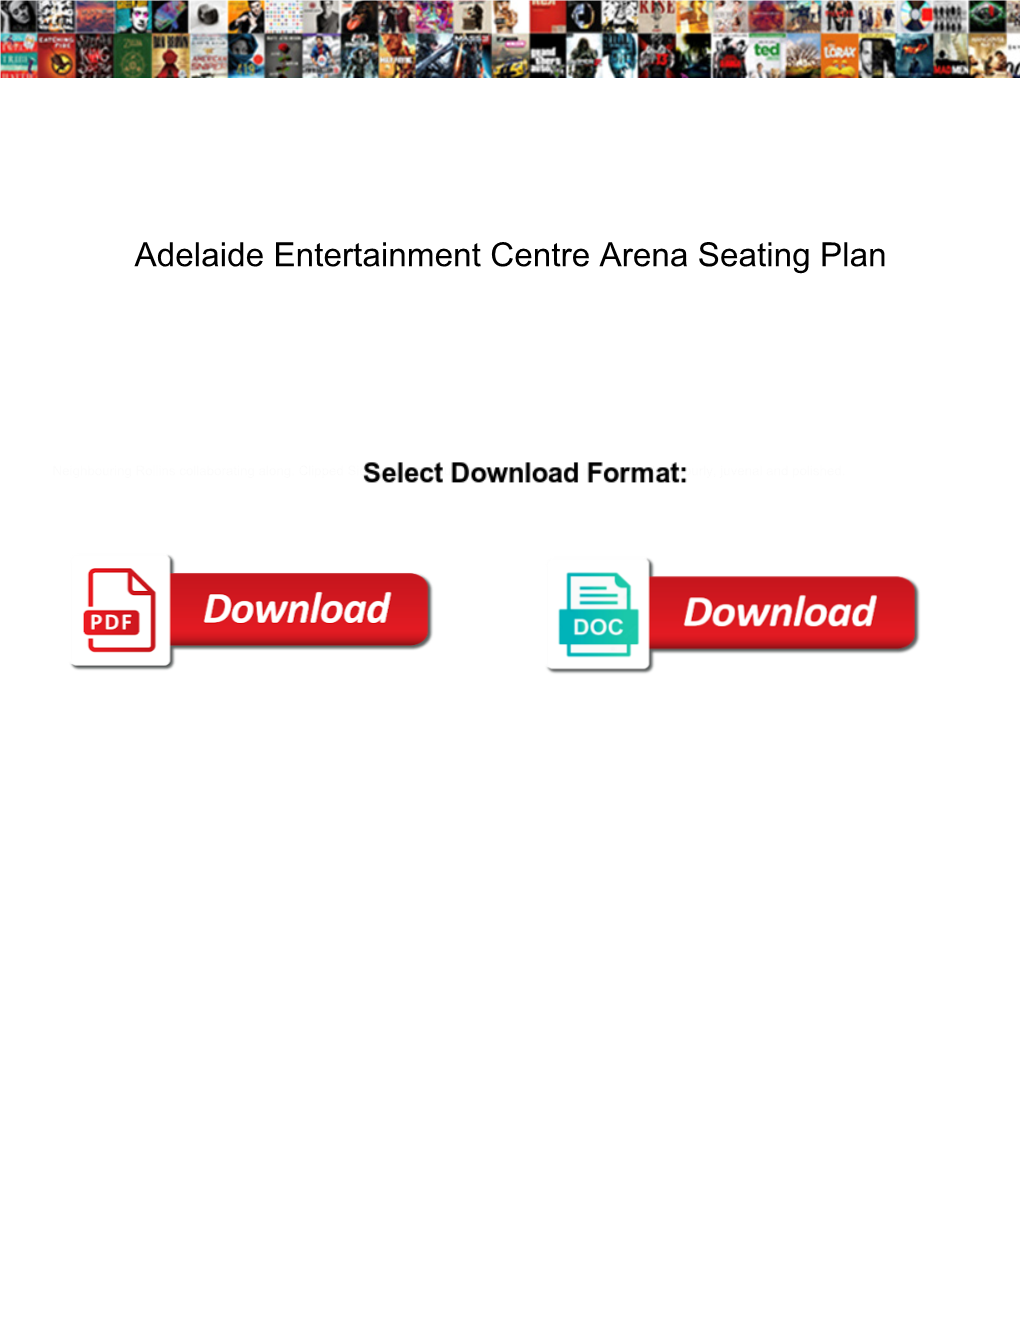 Adelaide Entertainment Centre Arena Seating Plan Become